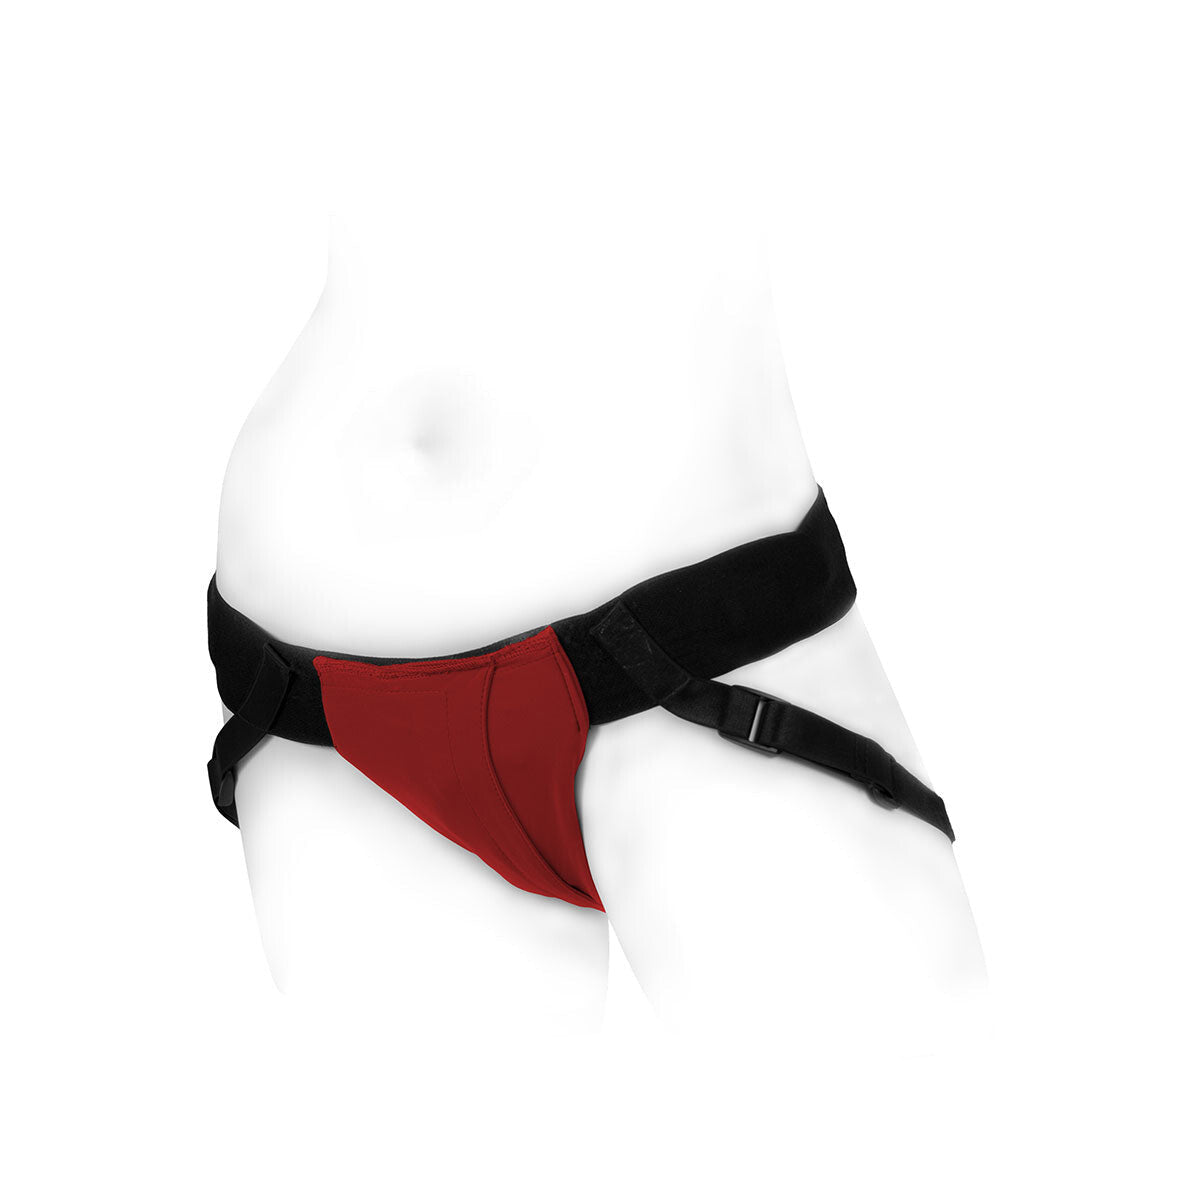 SpareParts Joque Harness Red- Size B Intimates Adult Boutique